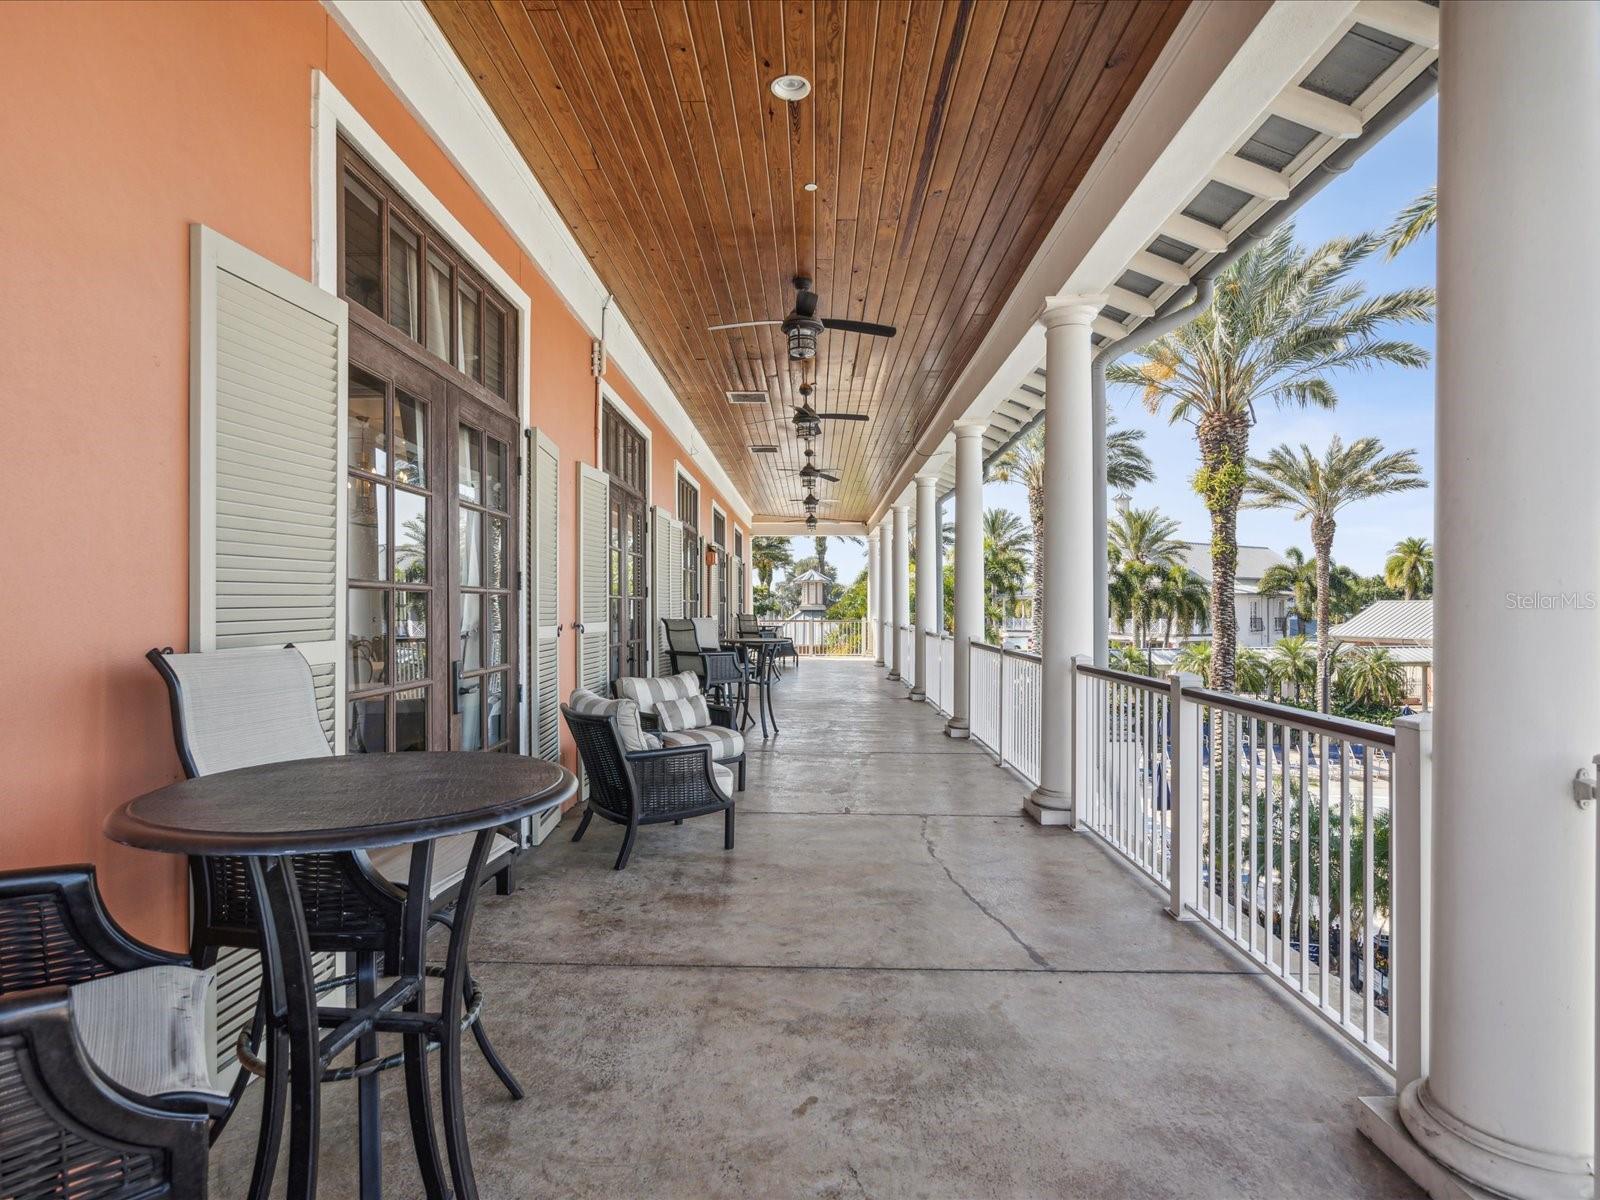 Bar tables and stools line the south facing veranda. This is a great spot to enjoy the southerly breeze and the beautiful view of the lagoon and the pool.